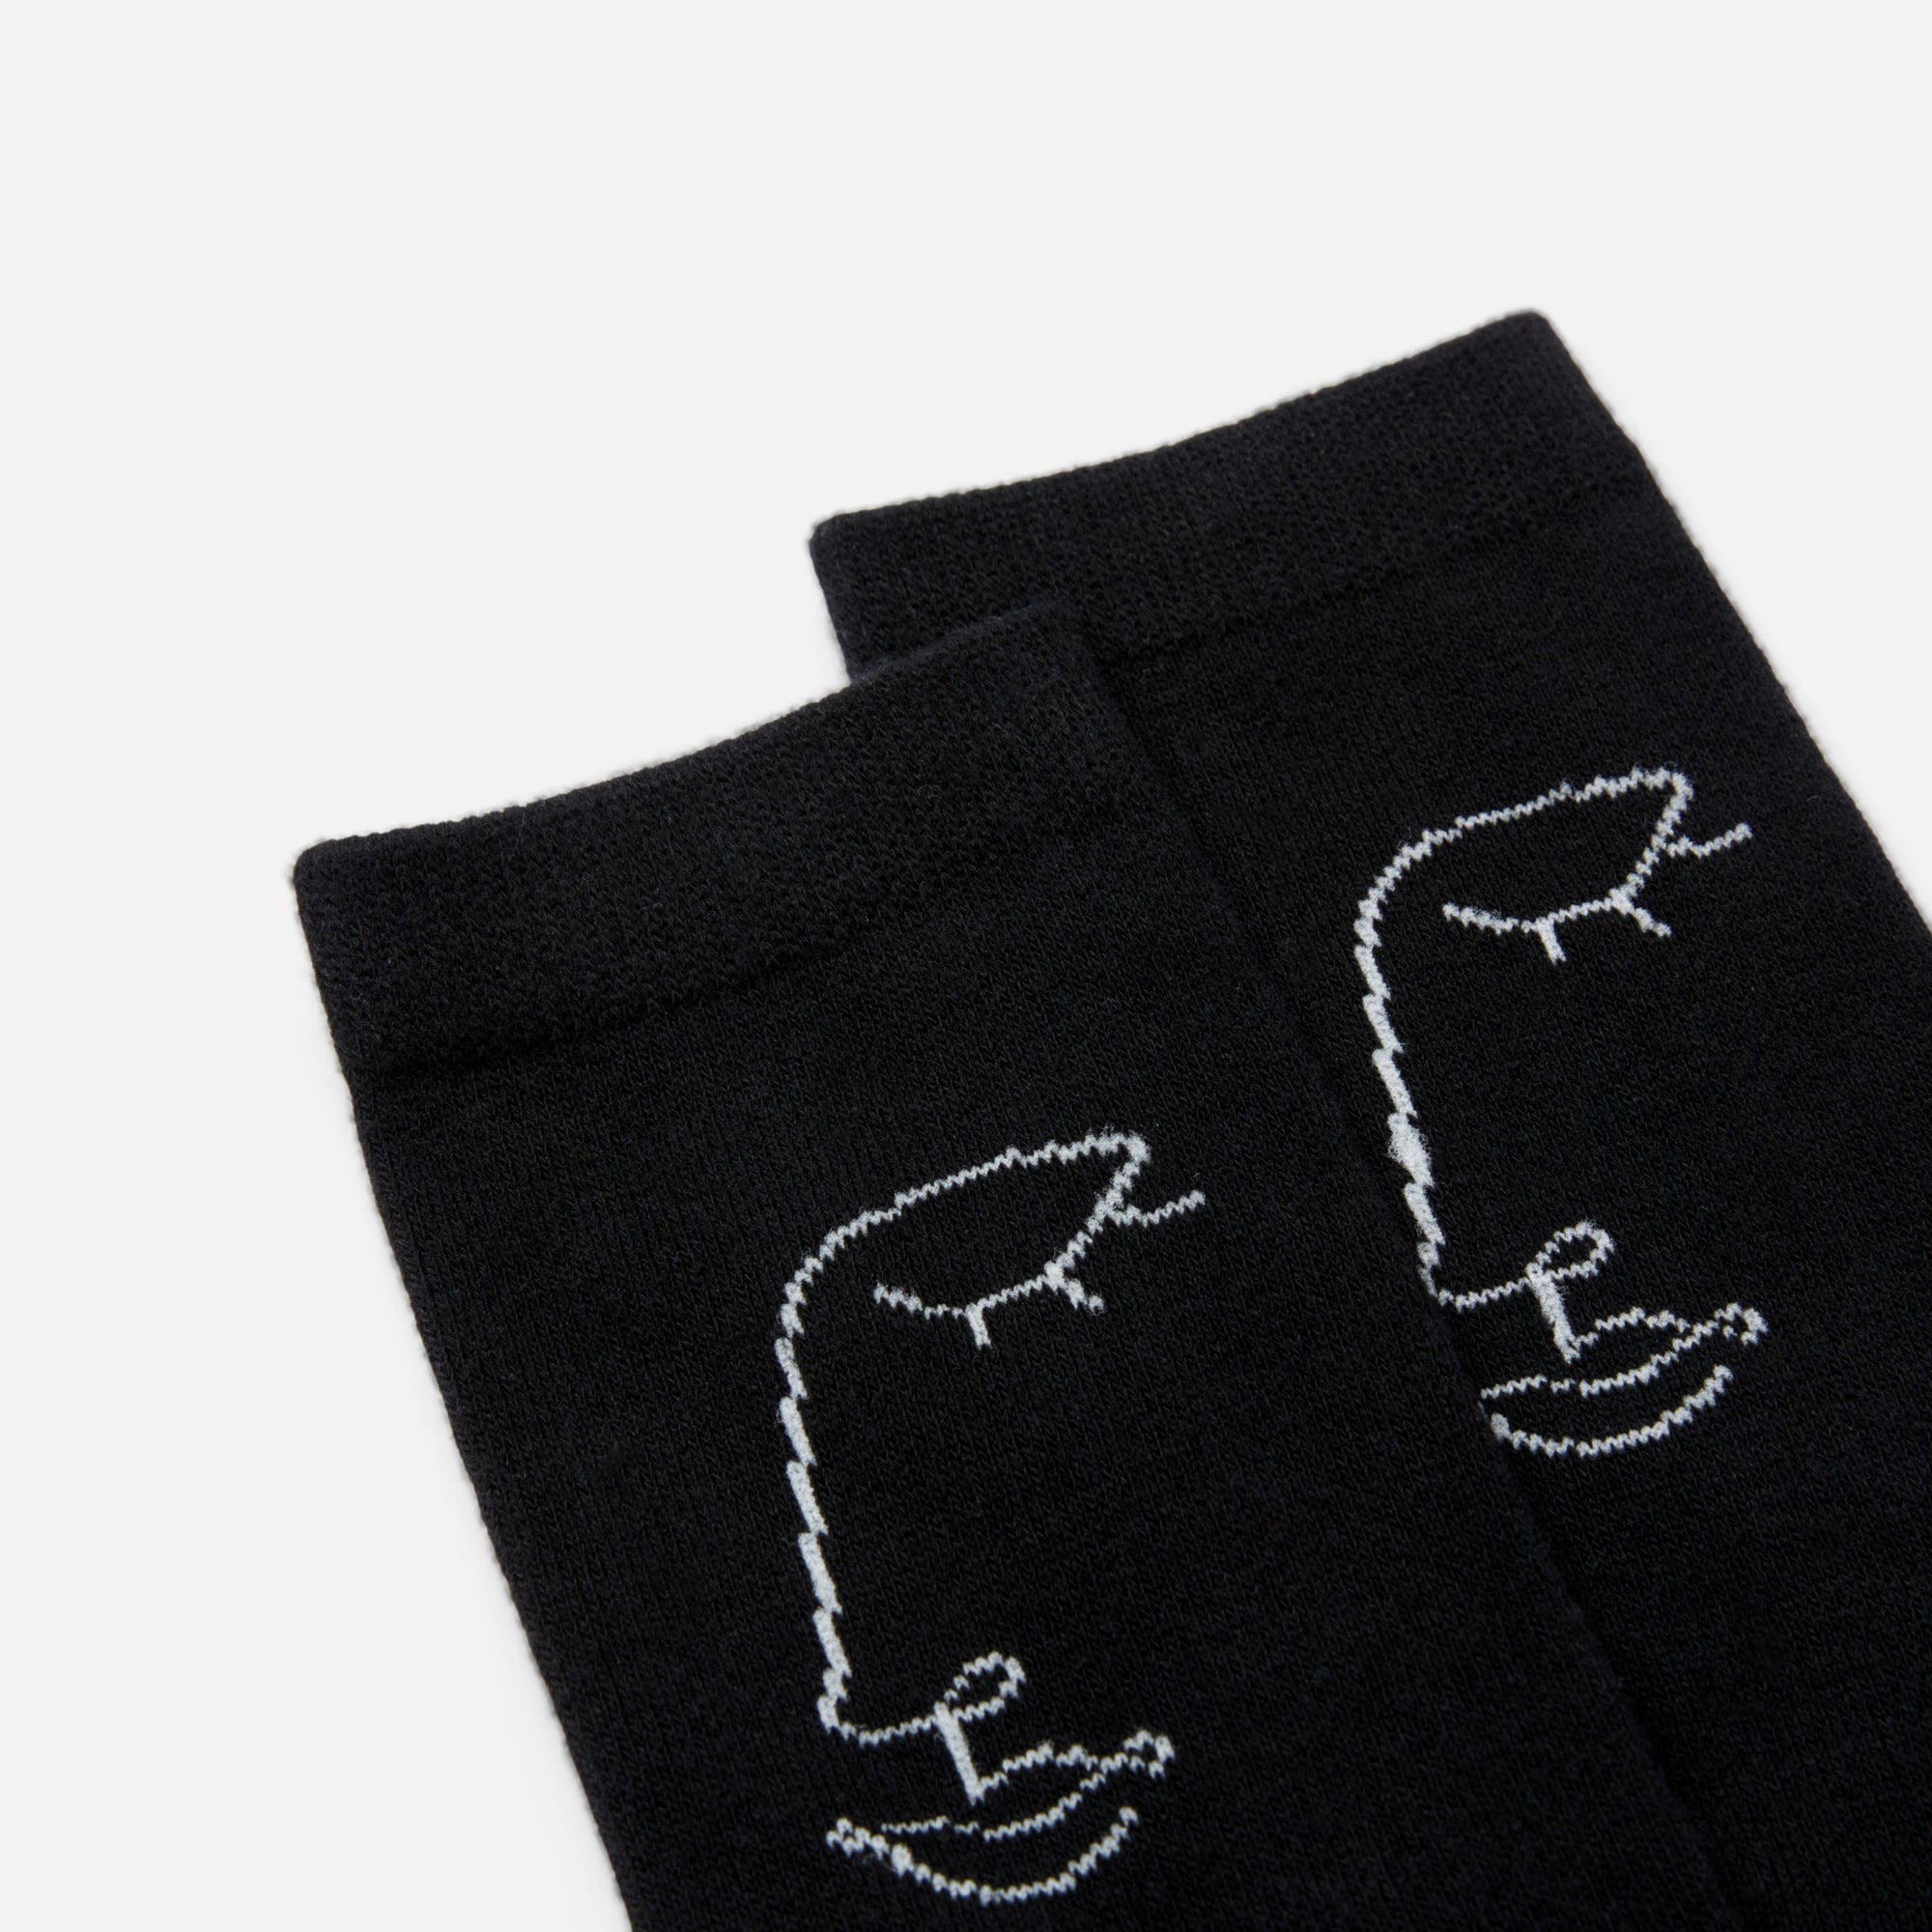 Black socks with faces 